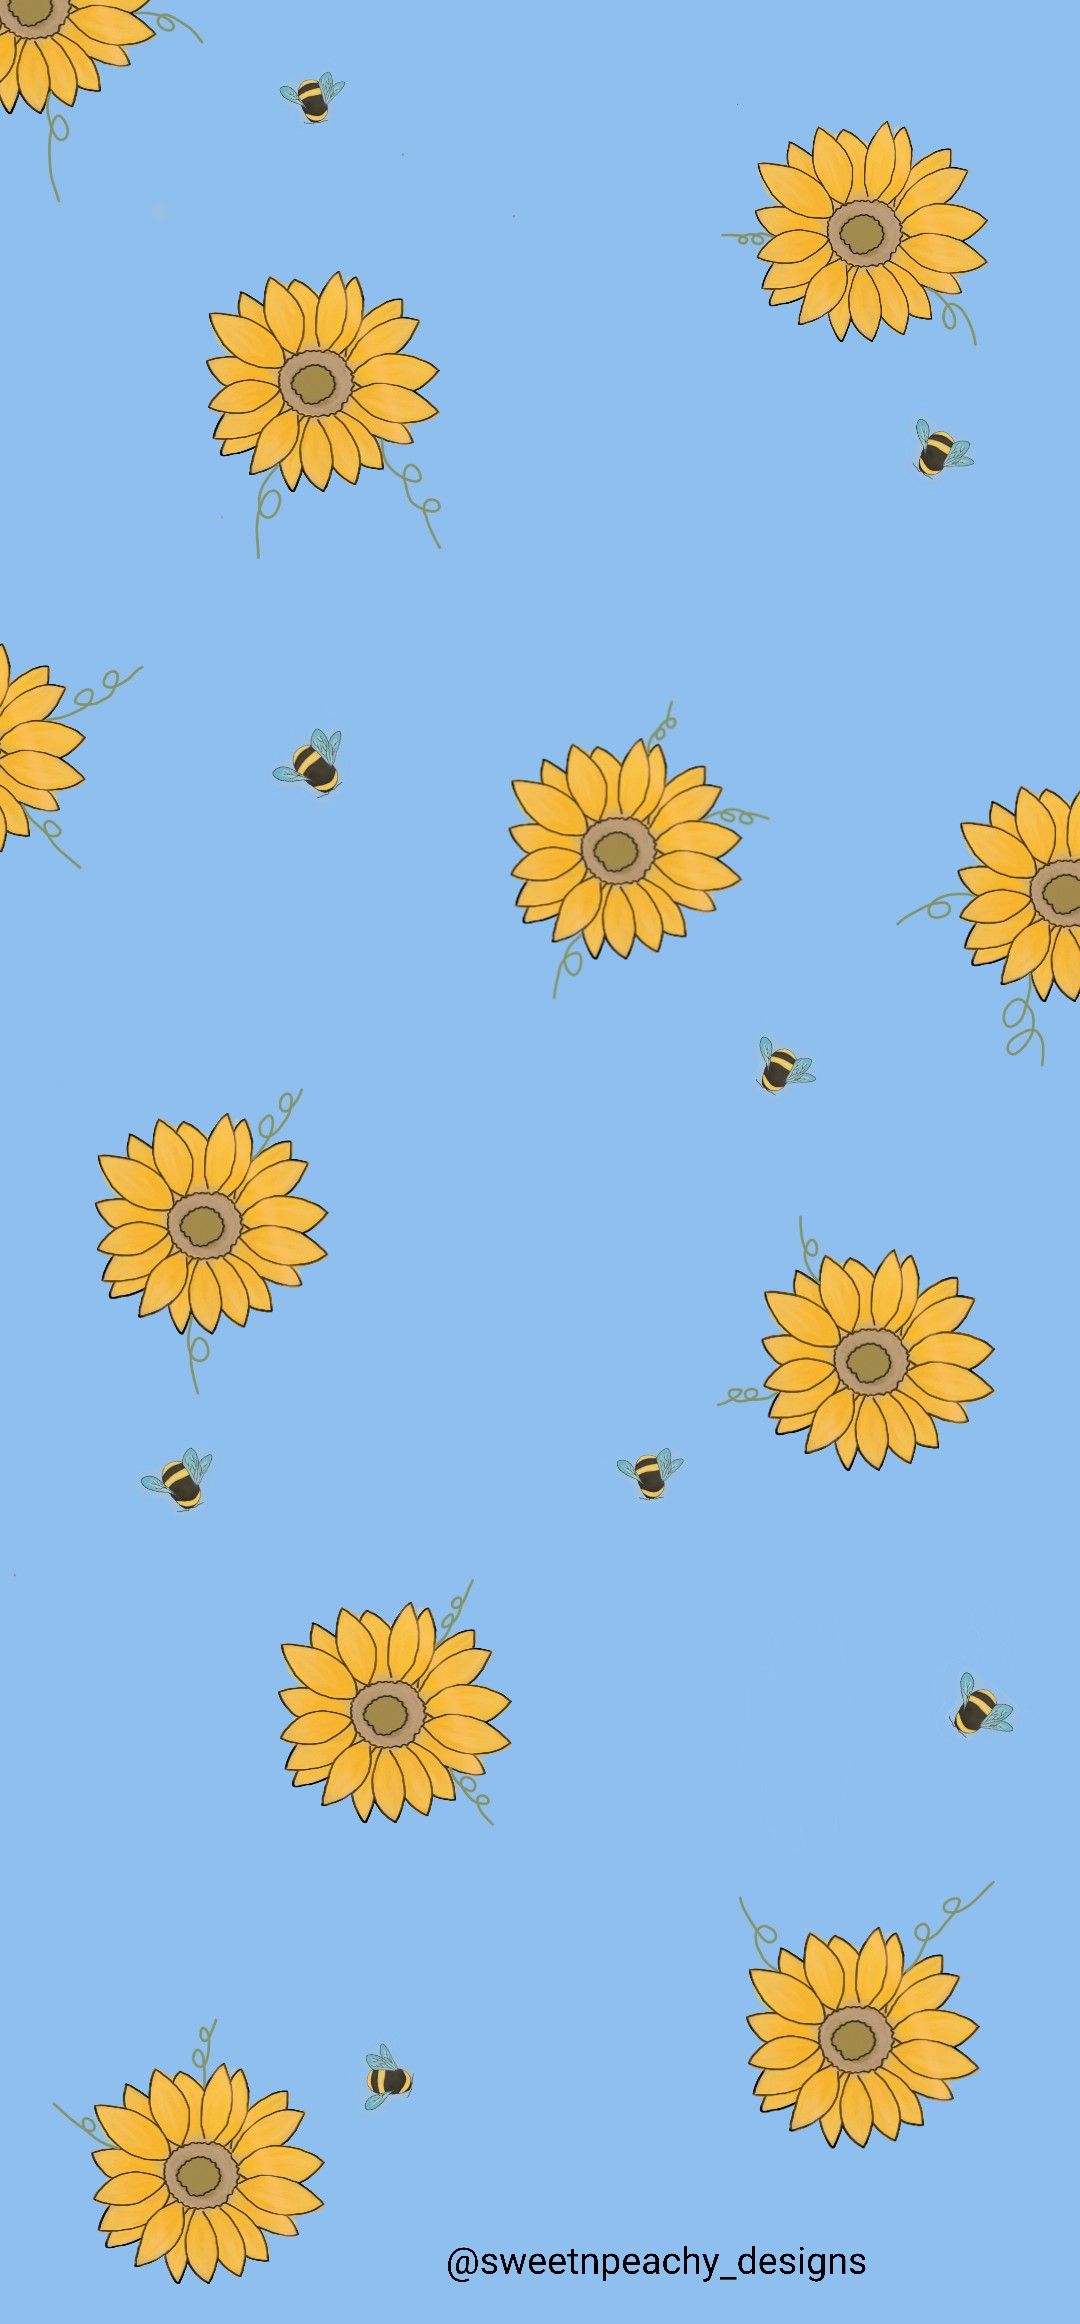 Sunflower And Bees Phone Wallpaper